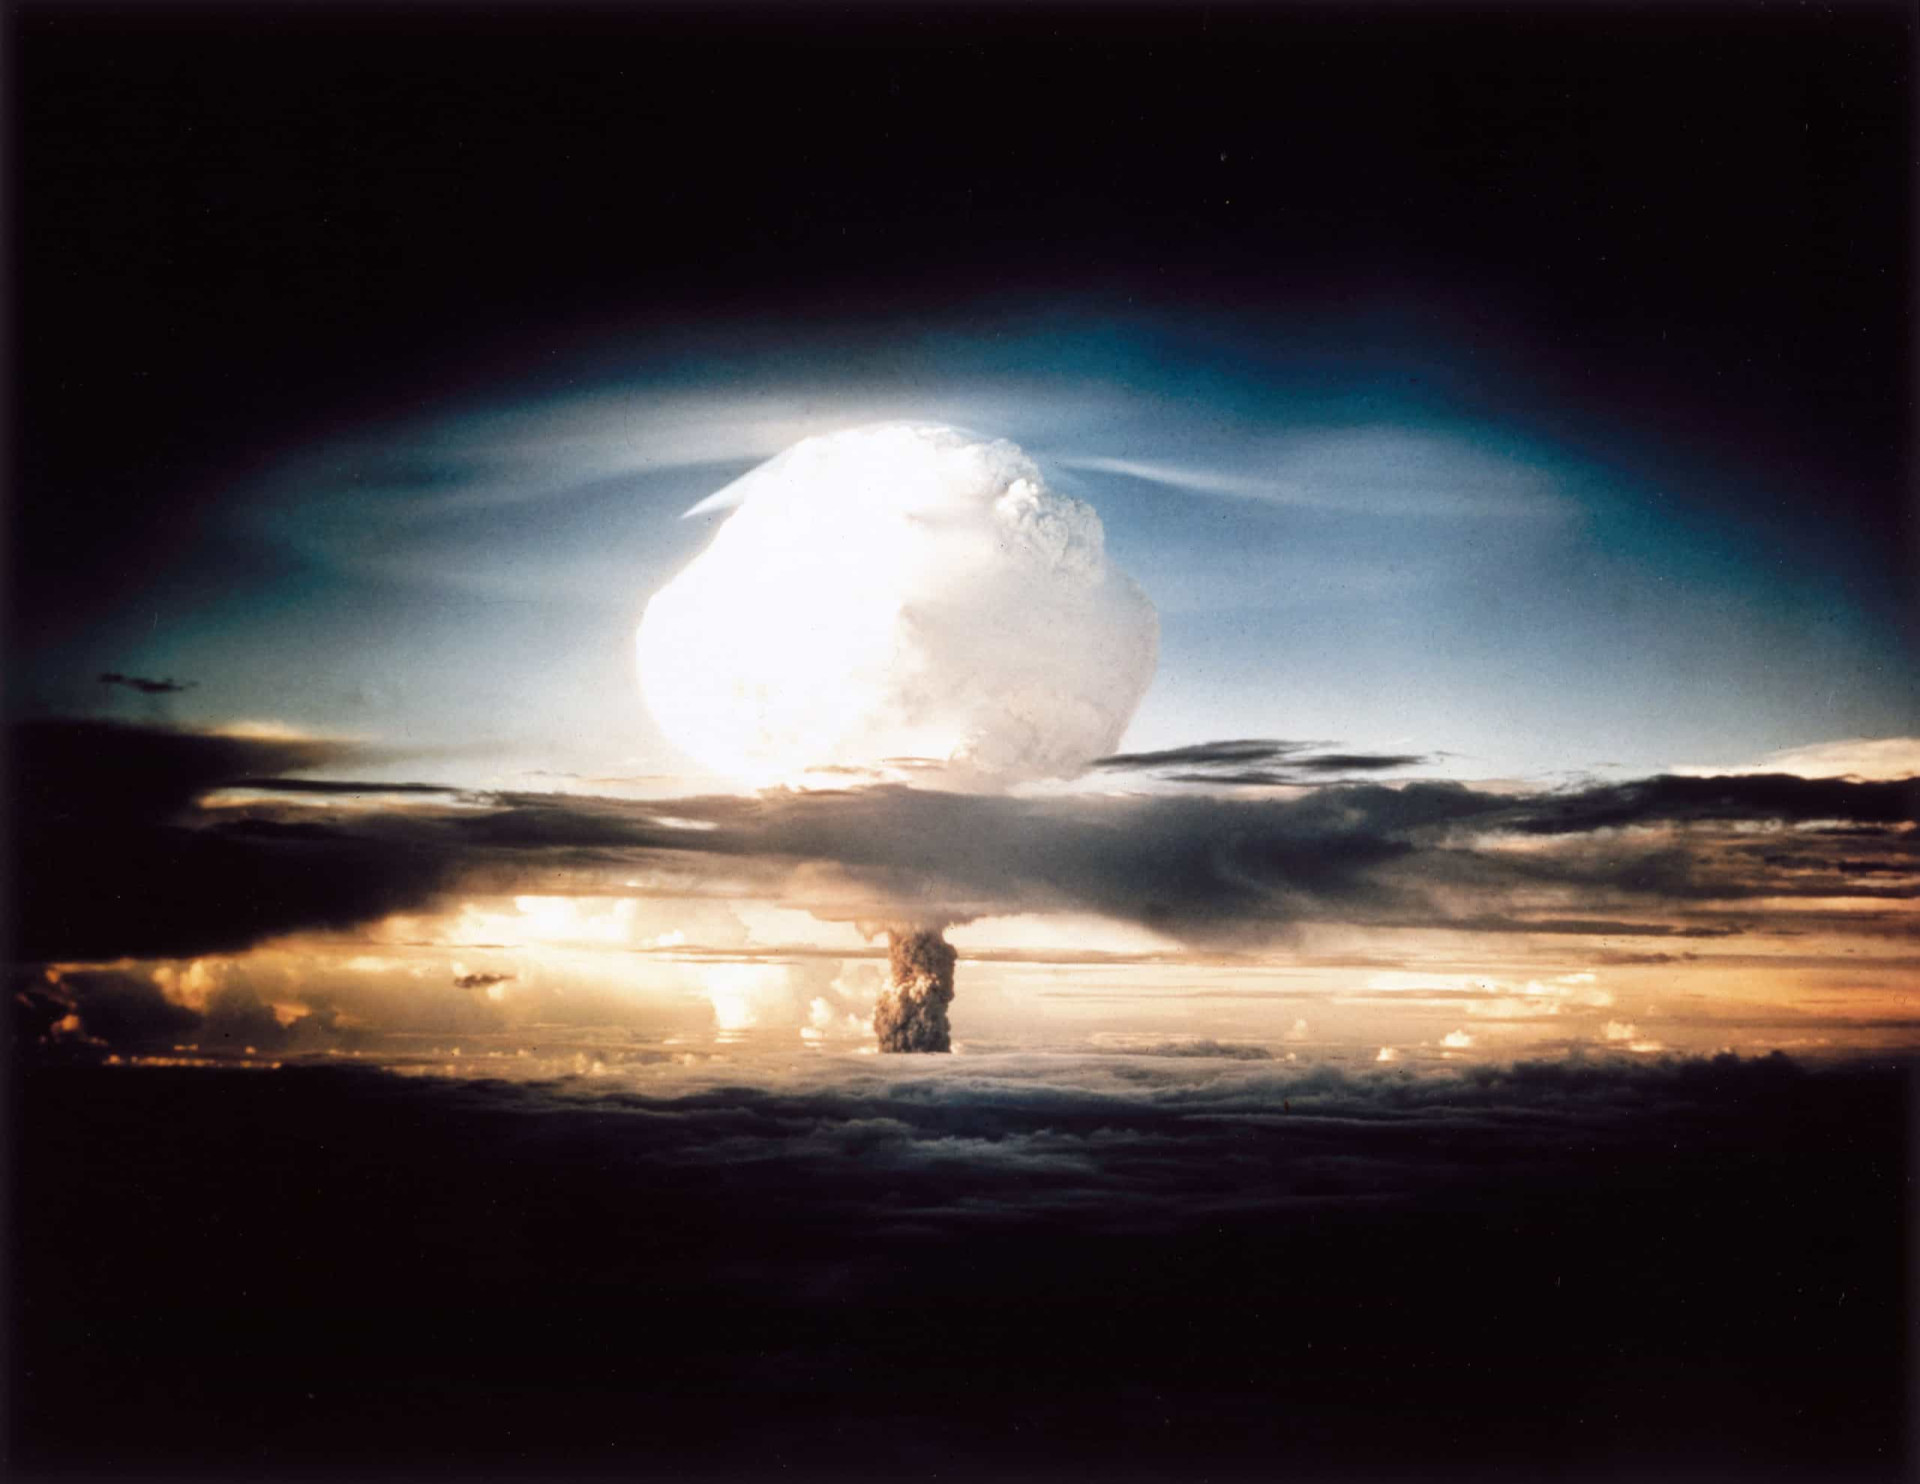 <p>The United States tests its first thermonuclear device, in November 1952 at Eniwetok Atoll in the Pacific Proving Ground in the Marshall Islands, as part of Operation Ivy. The USSR responds with a similar test in August 1953. This remained the clock's closest approach to midnight (tied in 2018) until 2020.</p><p>You may also like:<a href="https://www.starsinsider.com/n/263077?utm_source=msn.com&utm_medium=display&utm_campaign=referral_description&utm_content=490923v3en-us"> Celebrities who lost all their money</a></p>